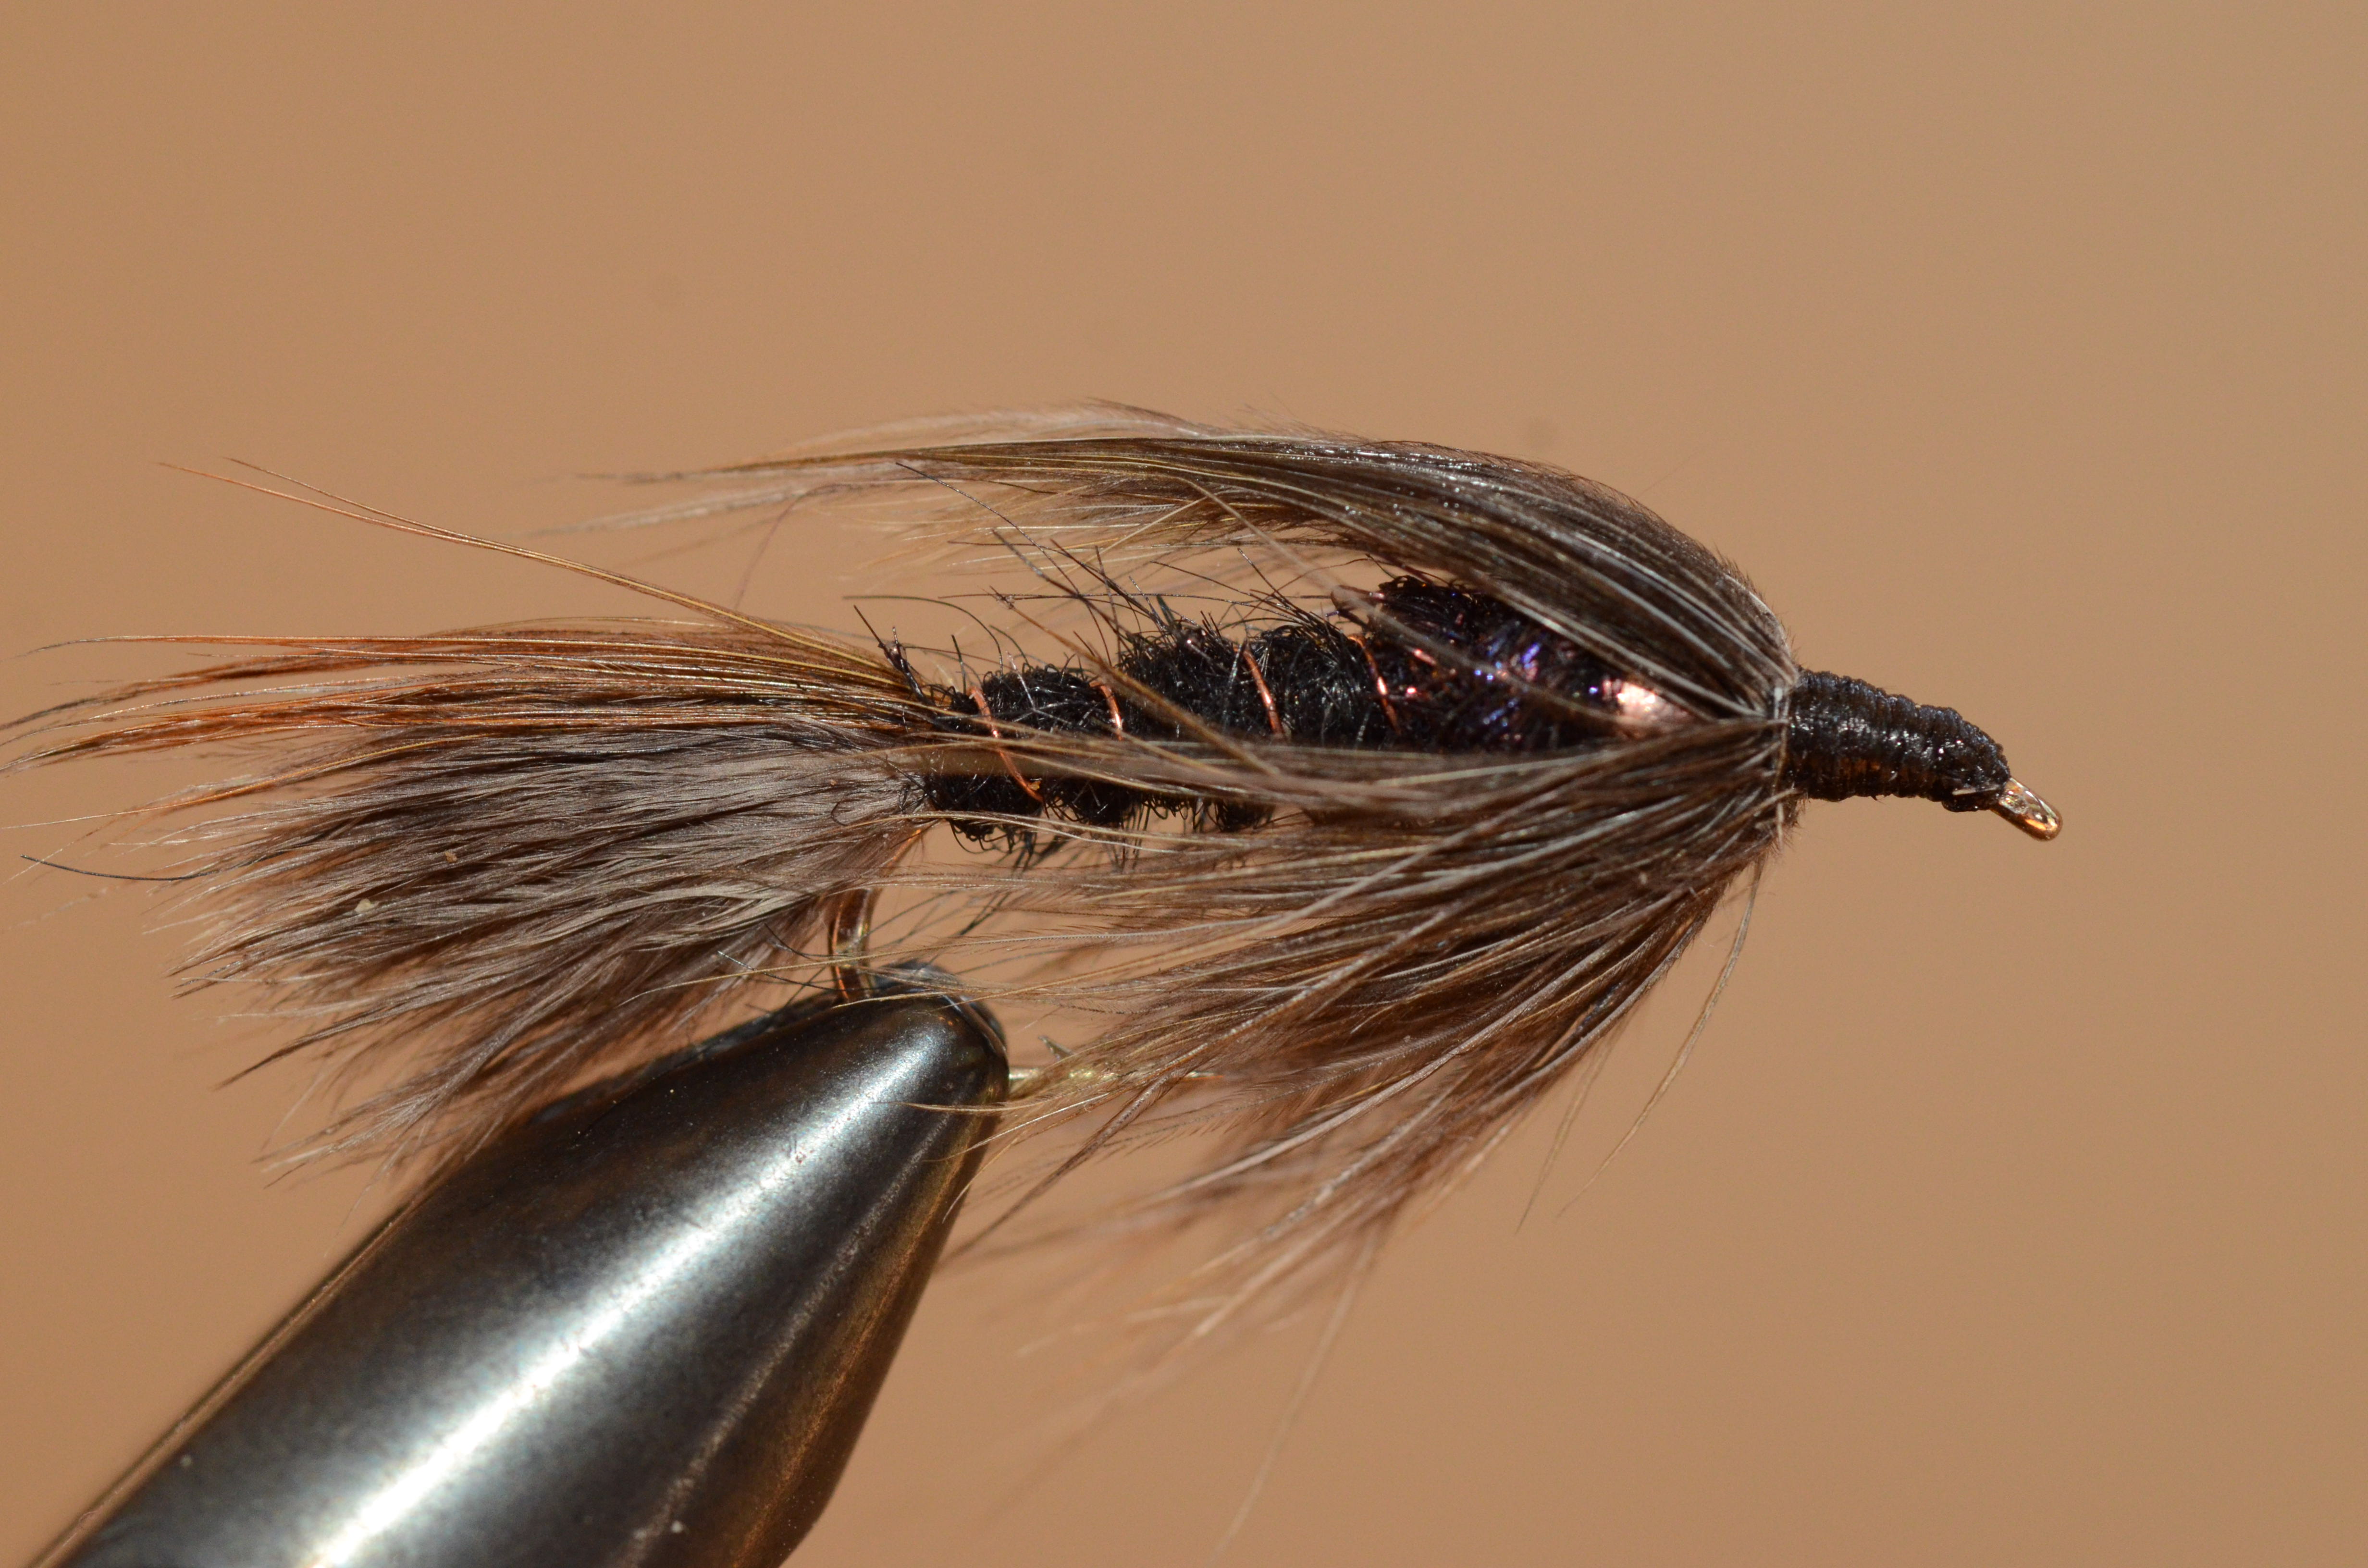 Feathers & Hackle - Tight Lines Fly Fishing